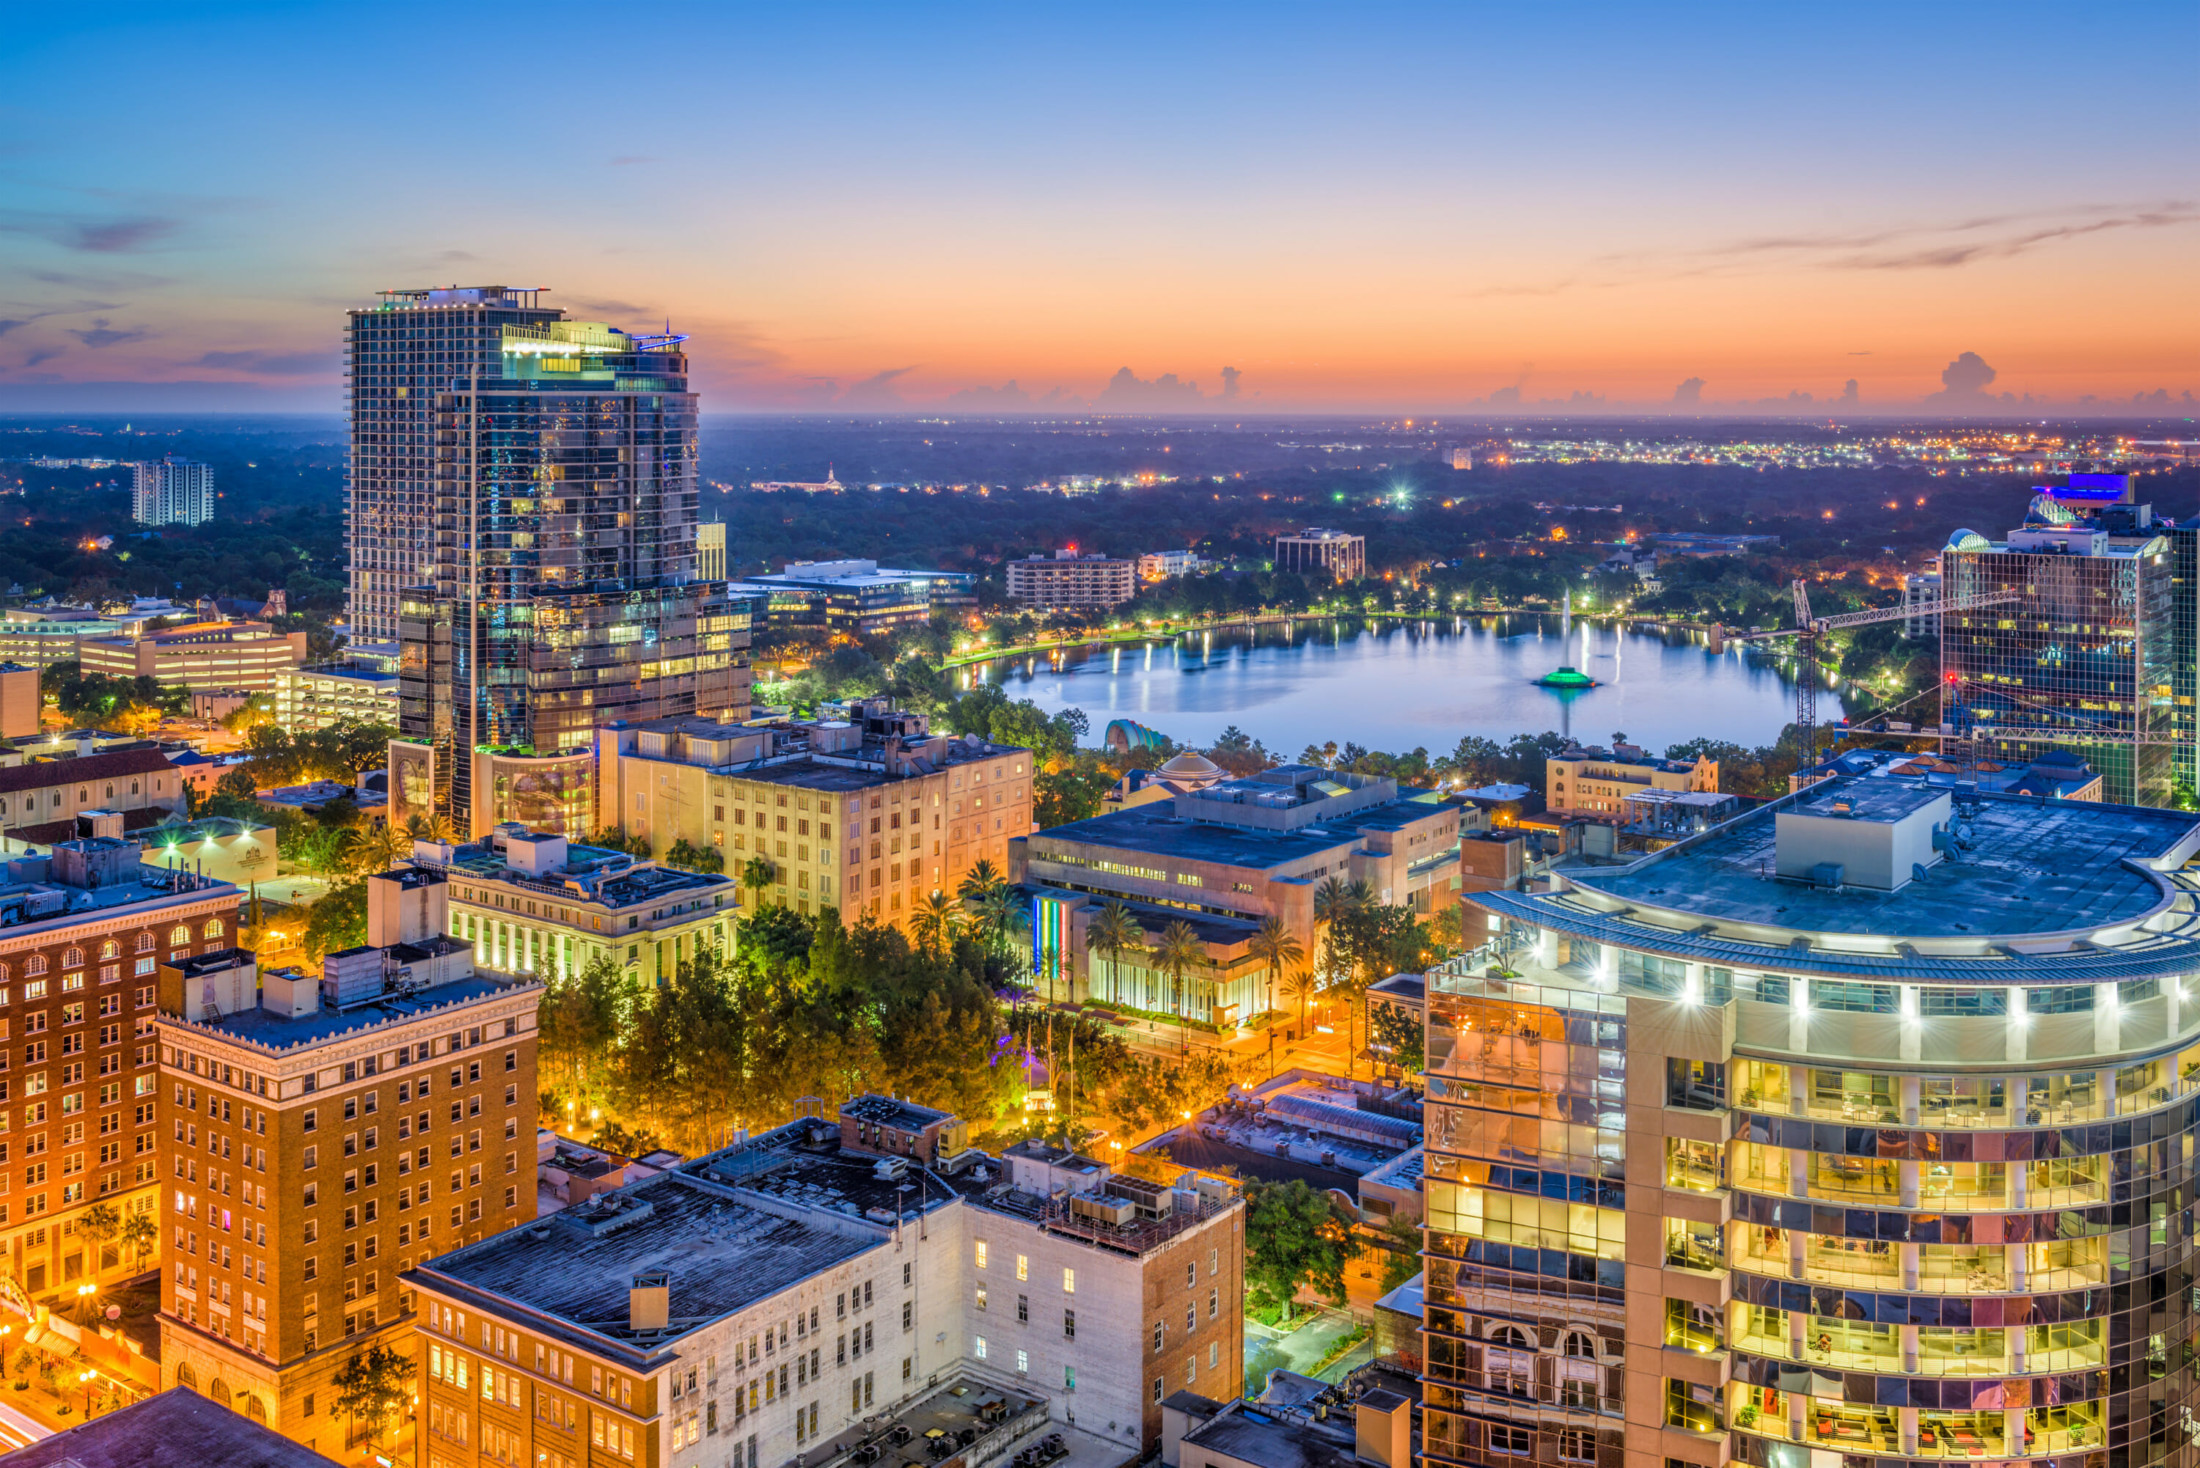 Orlando, Florida | 50 Up-and-Coming Real Estate Markets to Watch in 2019 | Buildium